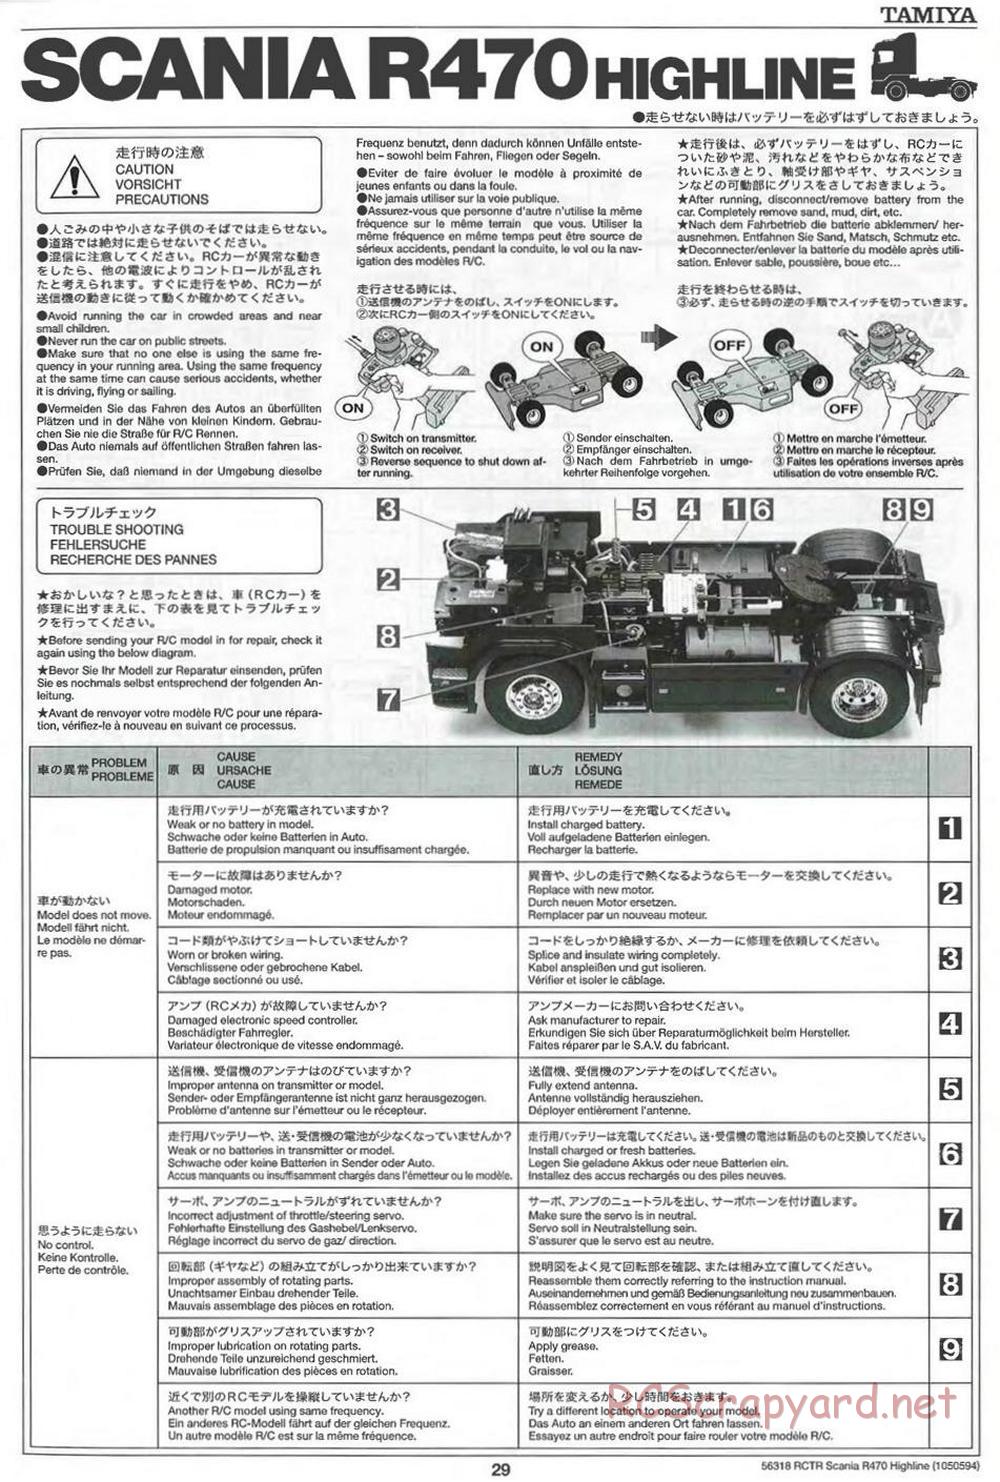 Tamiya - Scania R470 Highline Tractor Truck Chassis - Manual - Page 29